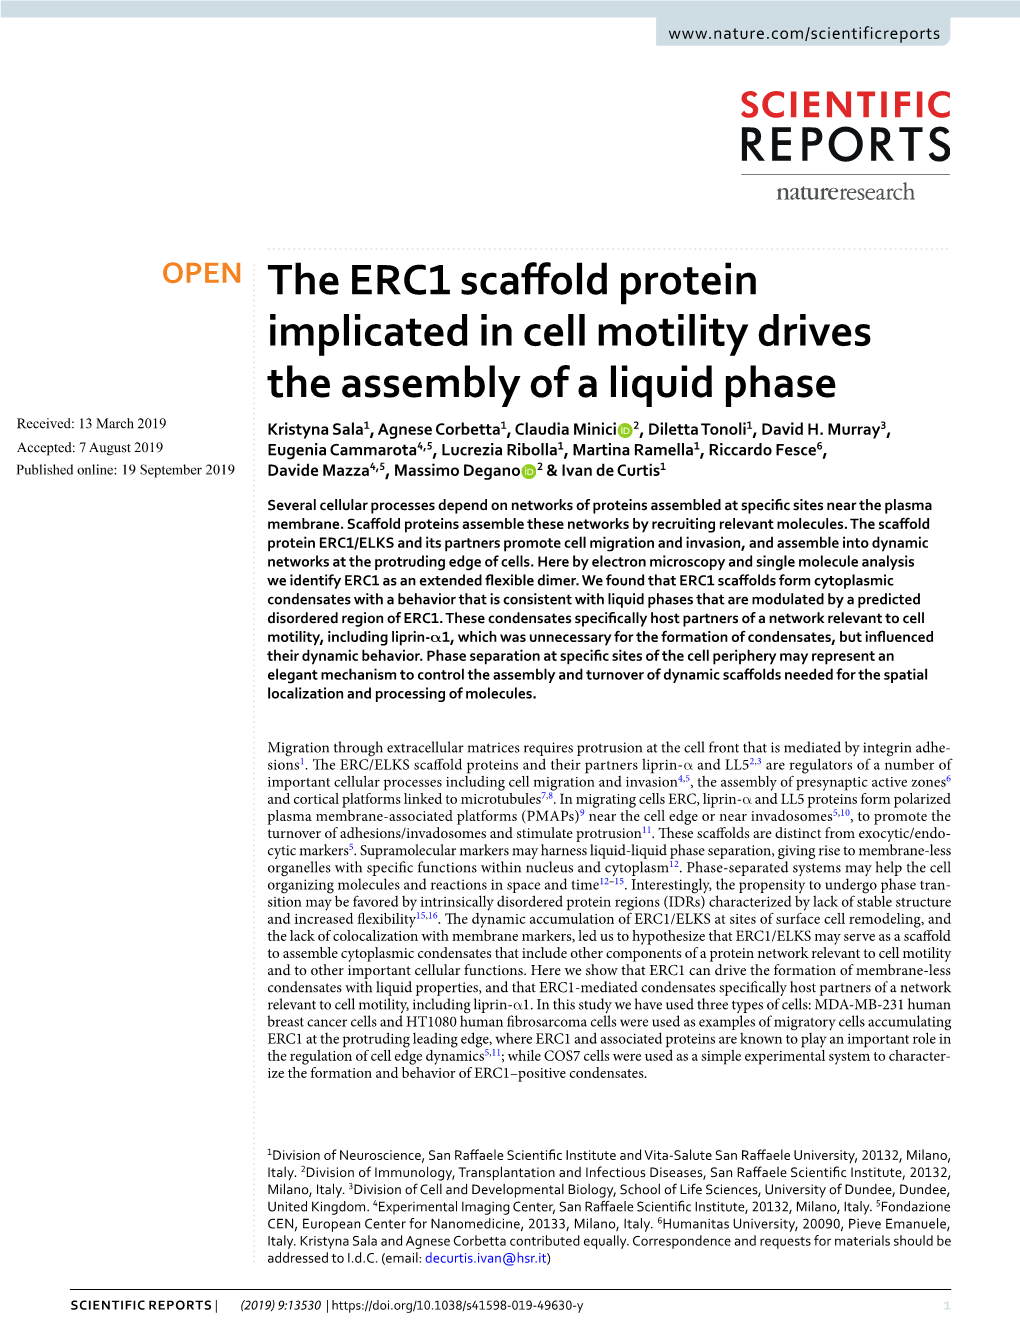 The ERC1 Scaffold Protein Implicated in Cell Motility Drives the Assembly of a Liquid Phase